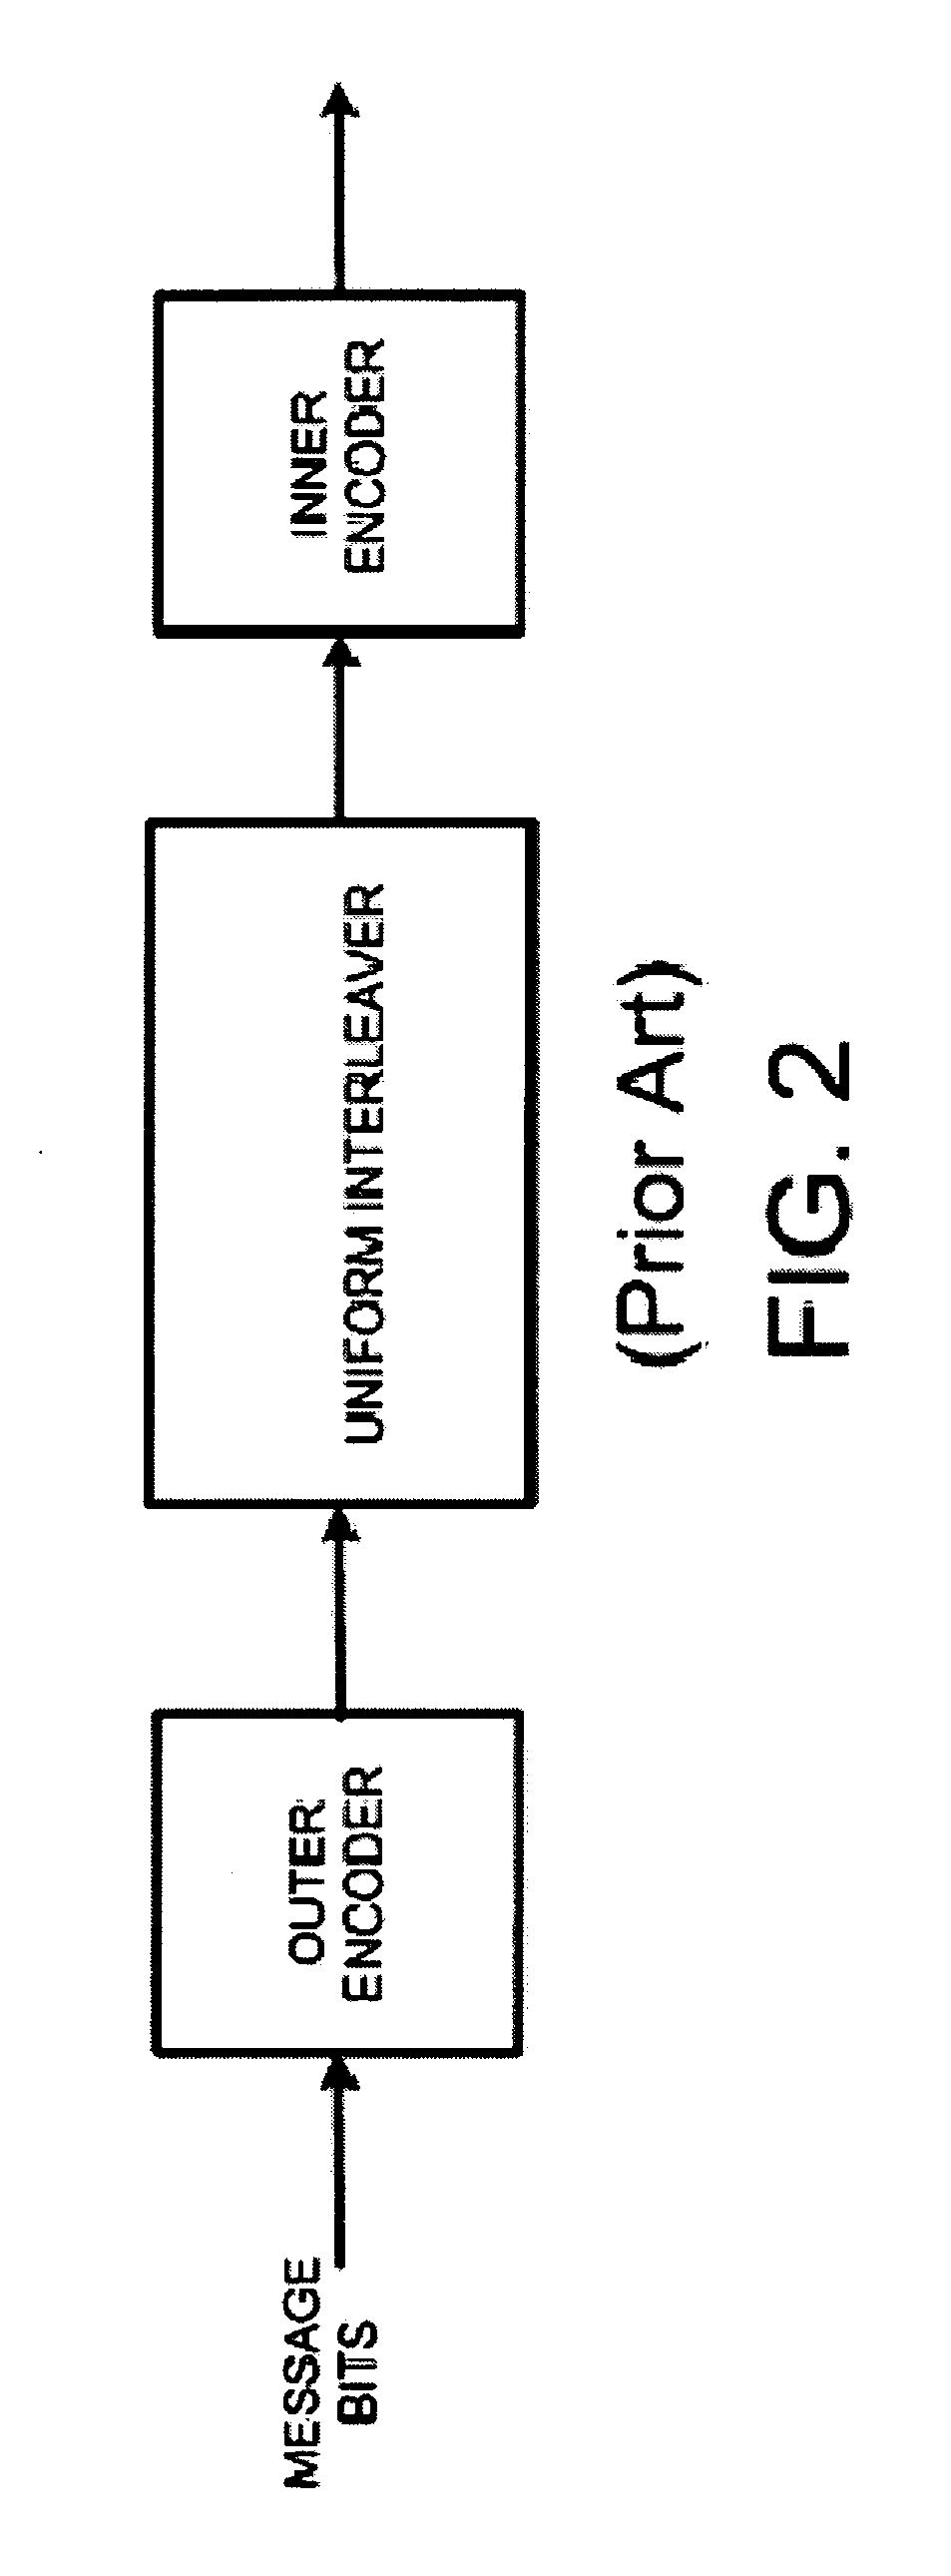 Methods, apparatus, and systems for coding with constrained interleaving